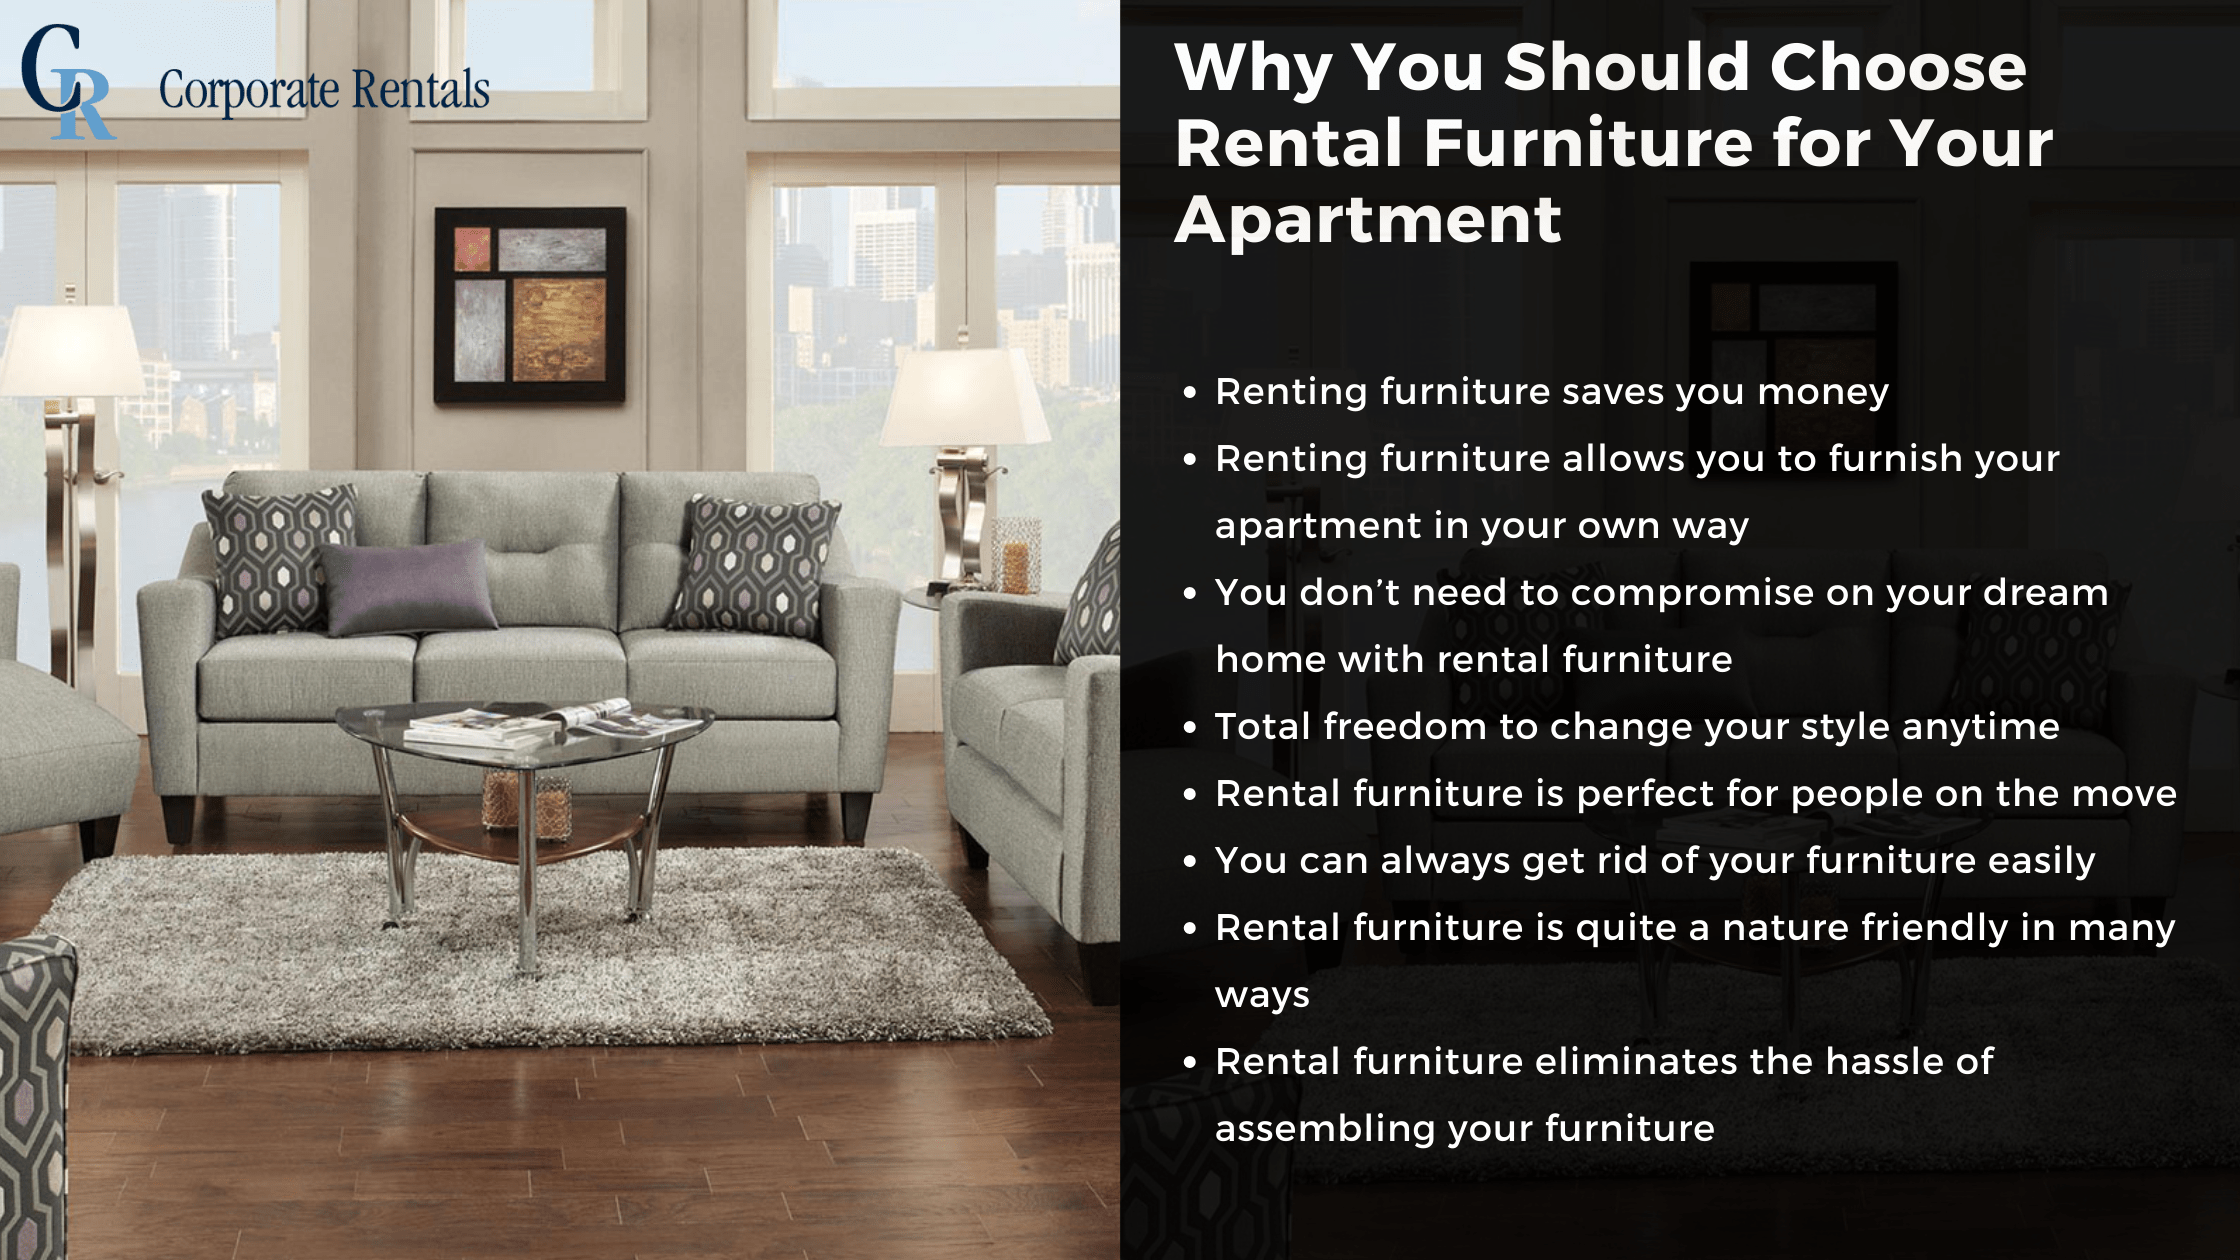 Why You Should Choose Rental Furniture for Your Apartment